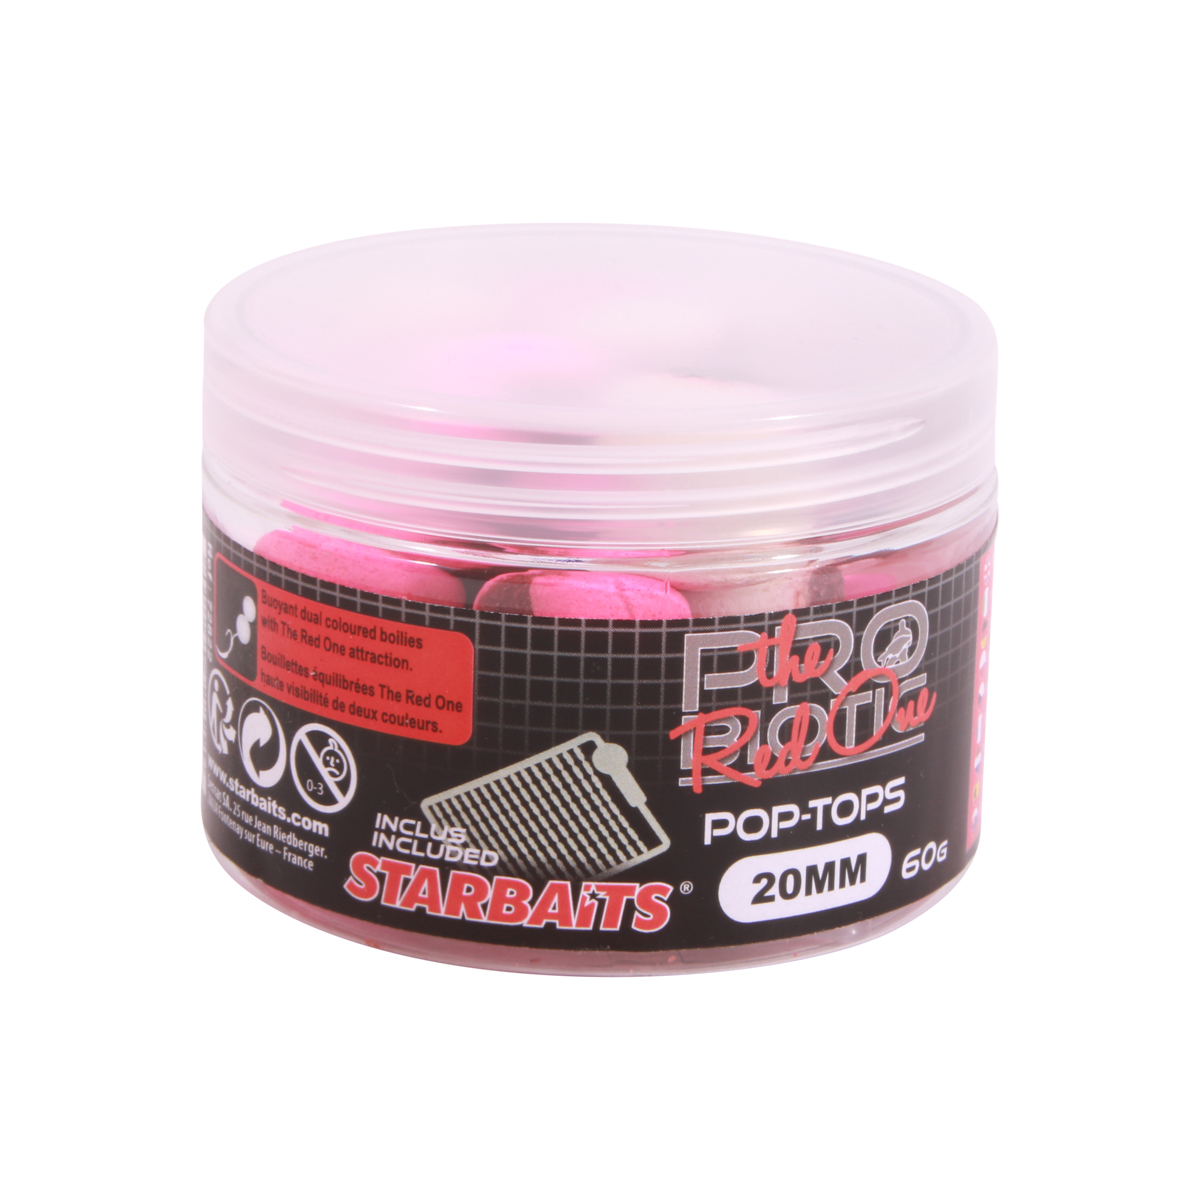 Starbaits Pro Red Pop Tops 20mm (60g)